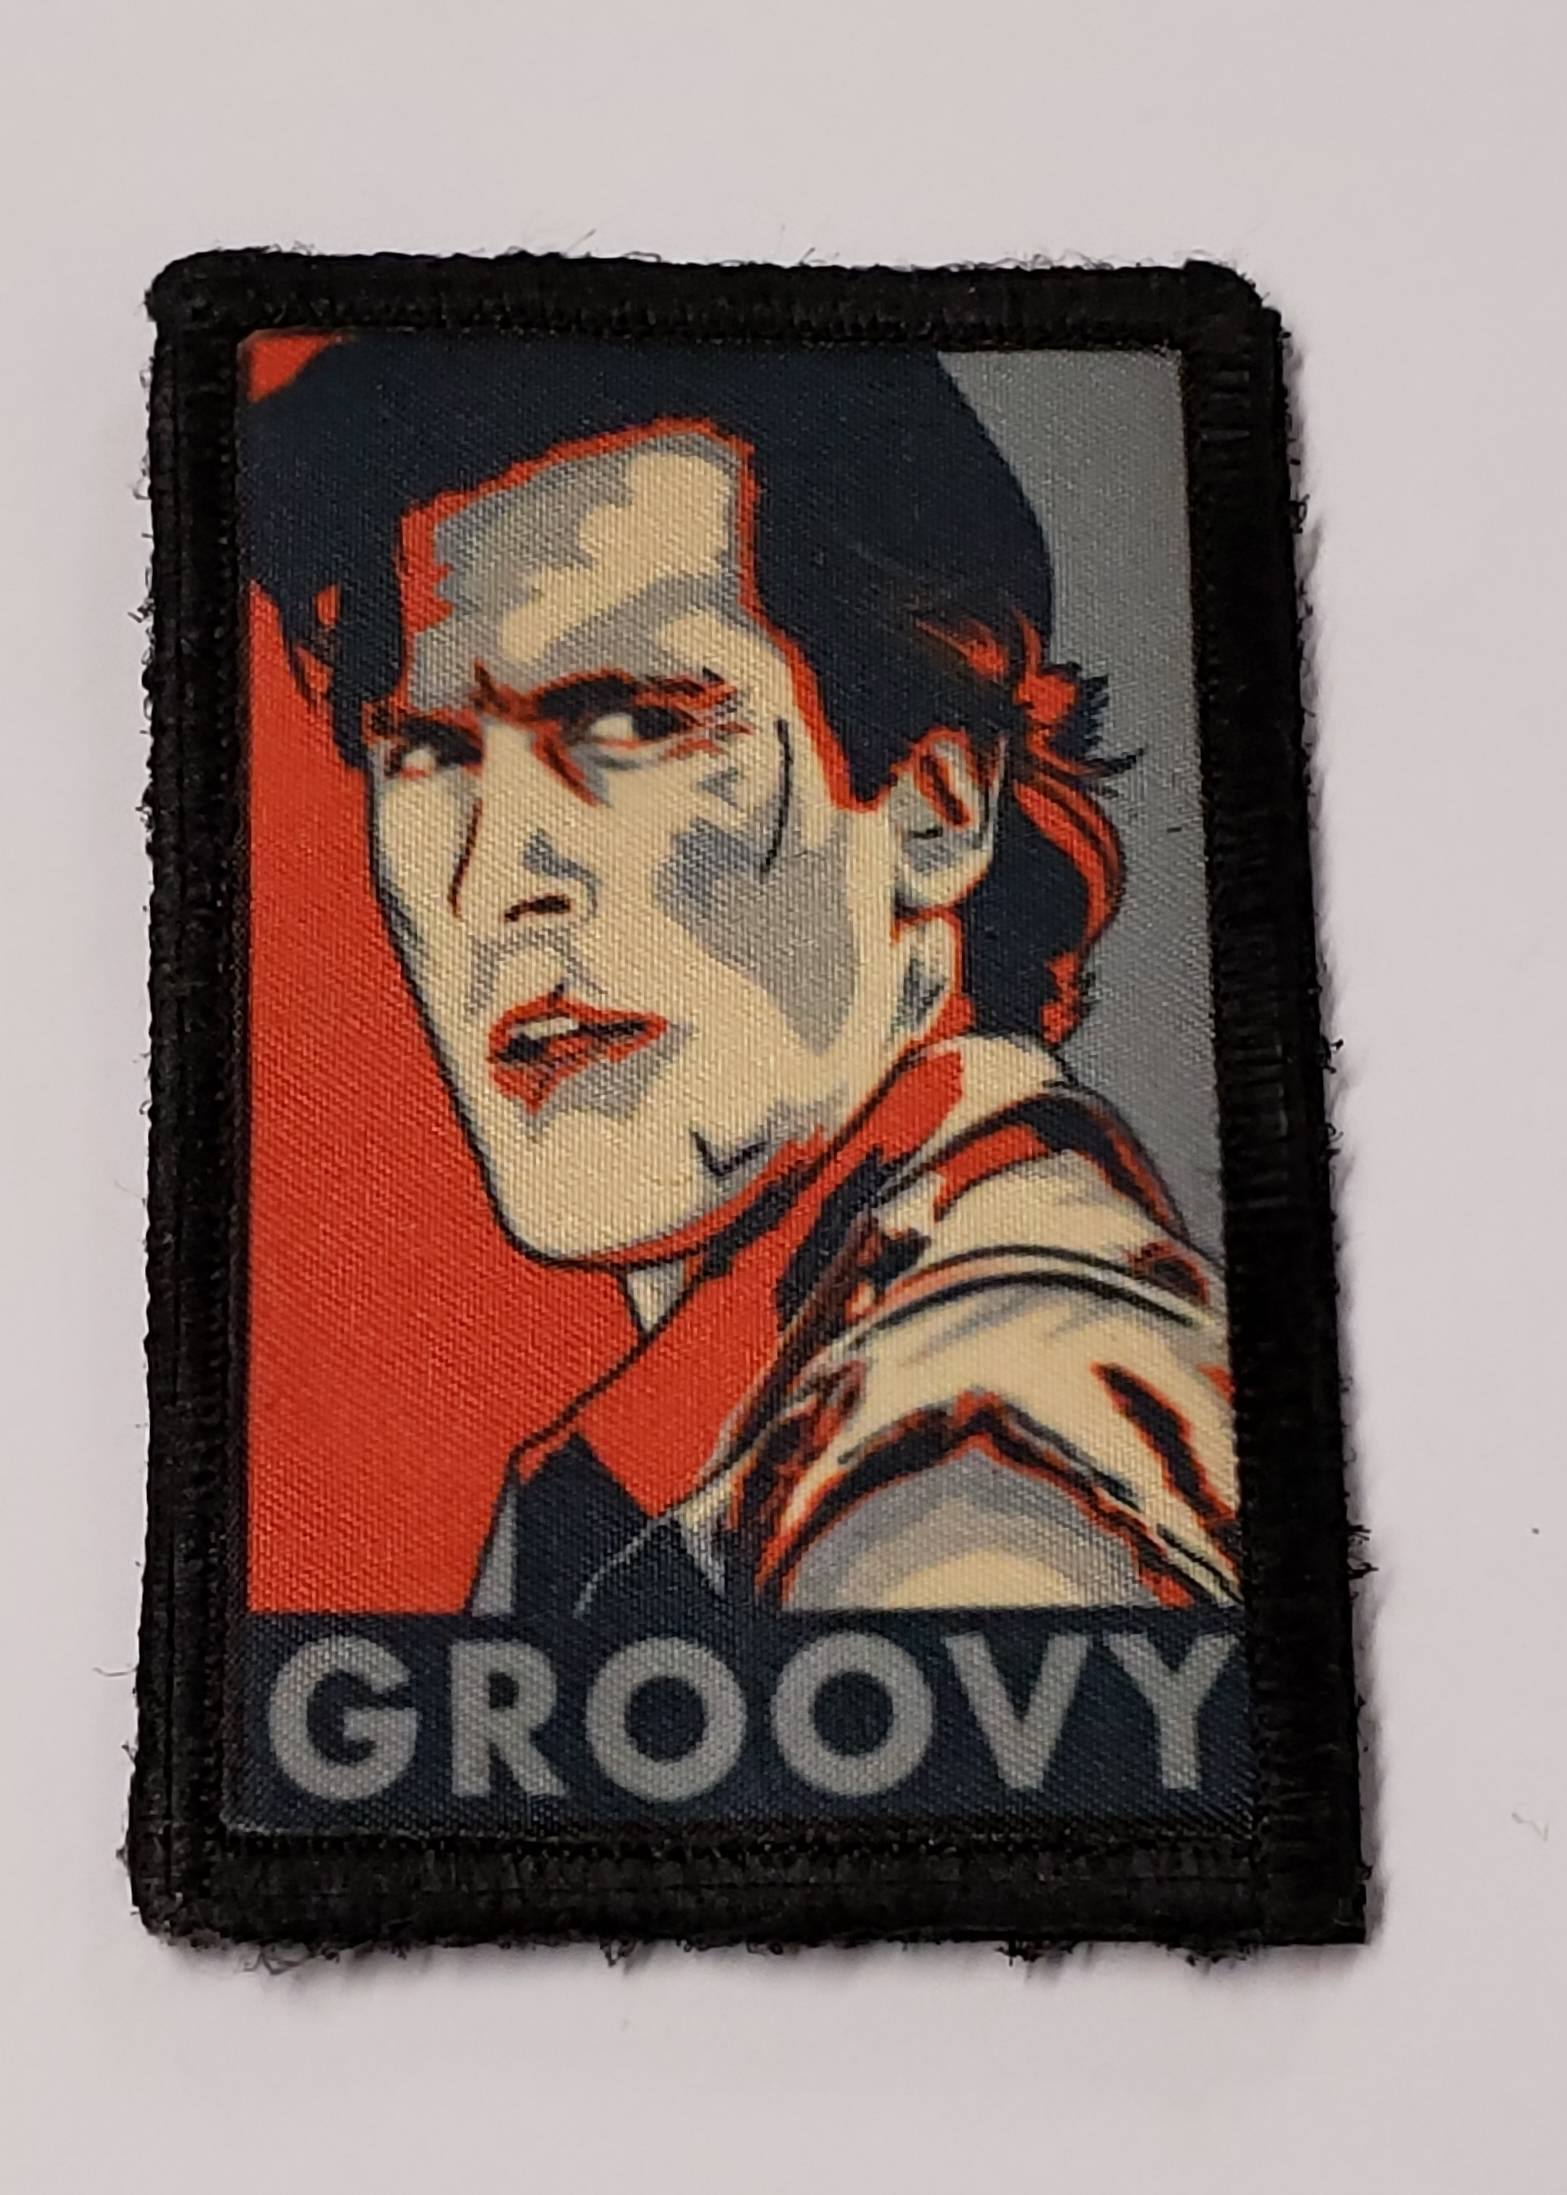 Ash Vs the Evil Dead "Groovy" Poster Morale Patch Morale Patches Redheaded T Shirts 